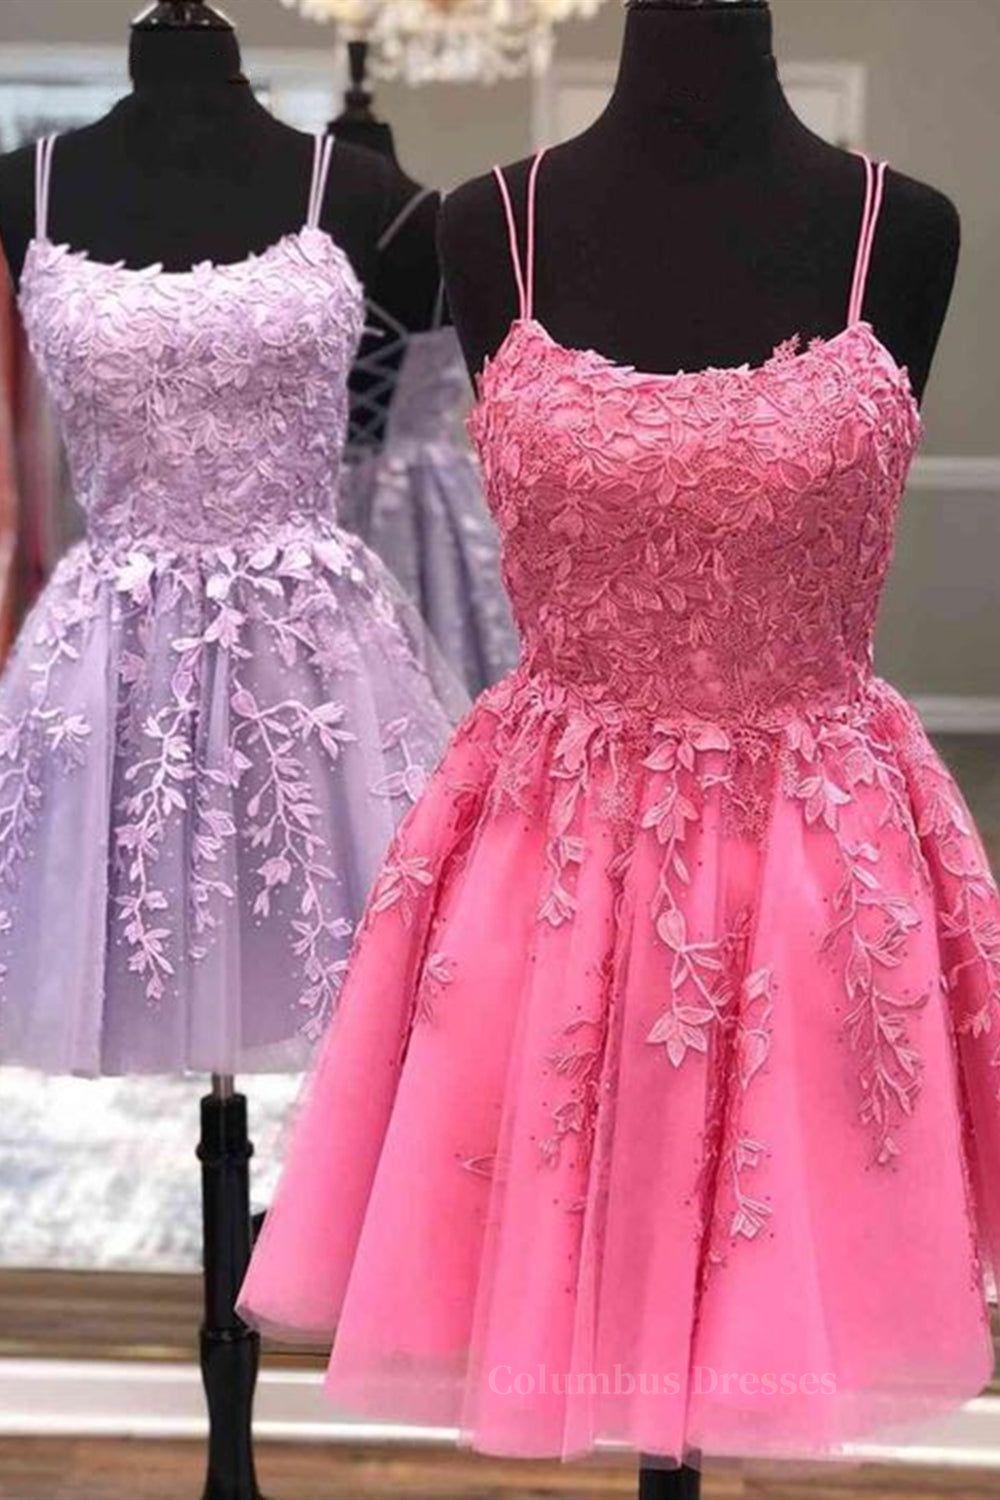 Bridesmaid Dresses Near Me, Cute Scoop Neck Lace Prom Homecoming Dresses, Short Lace Formal Evening Dresses